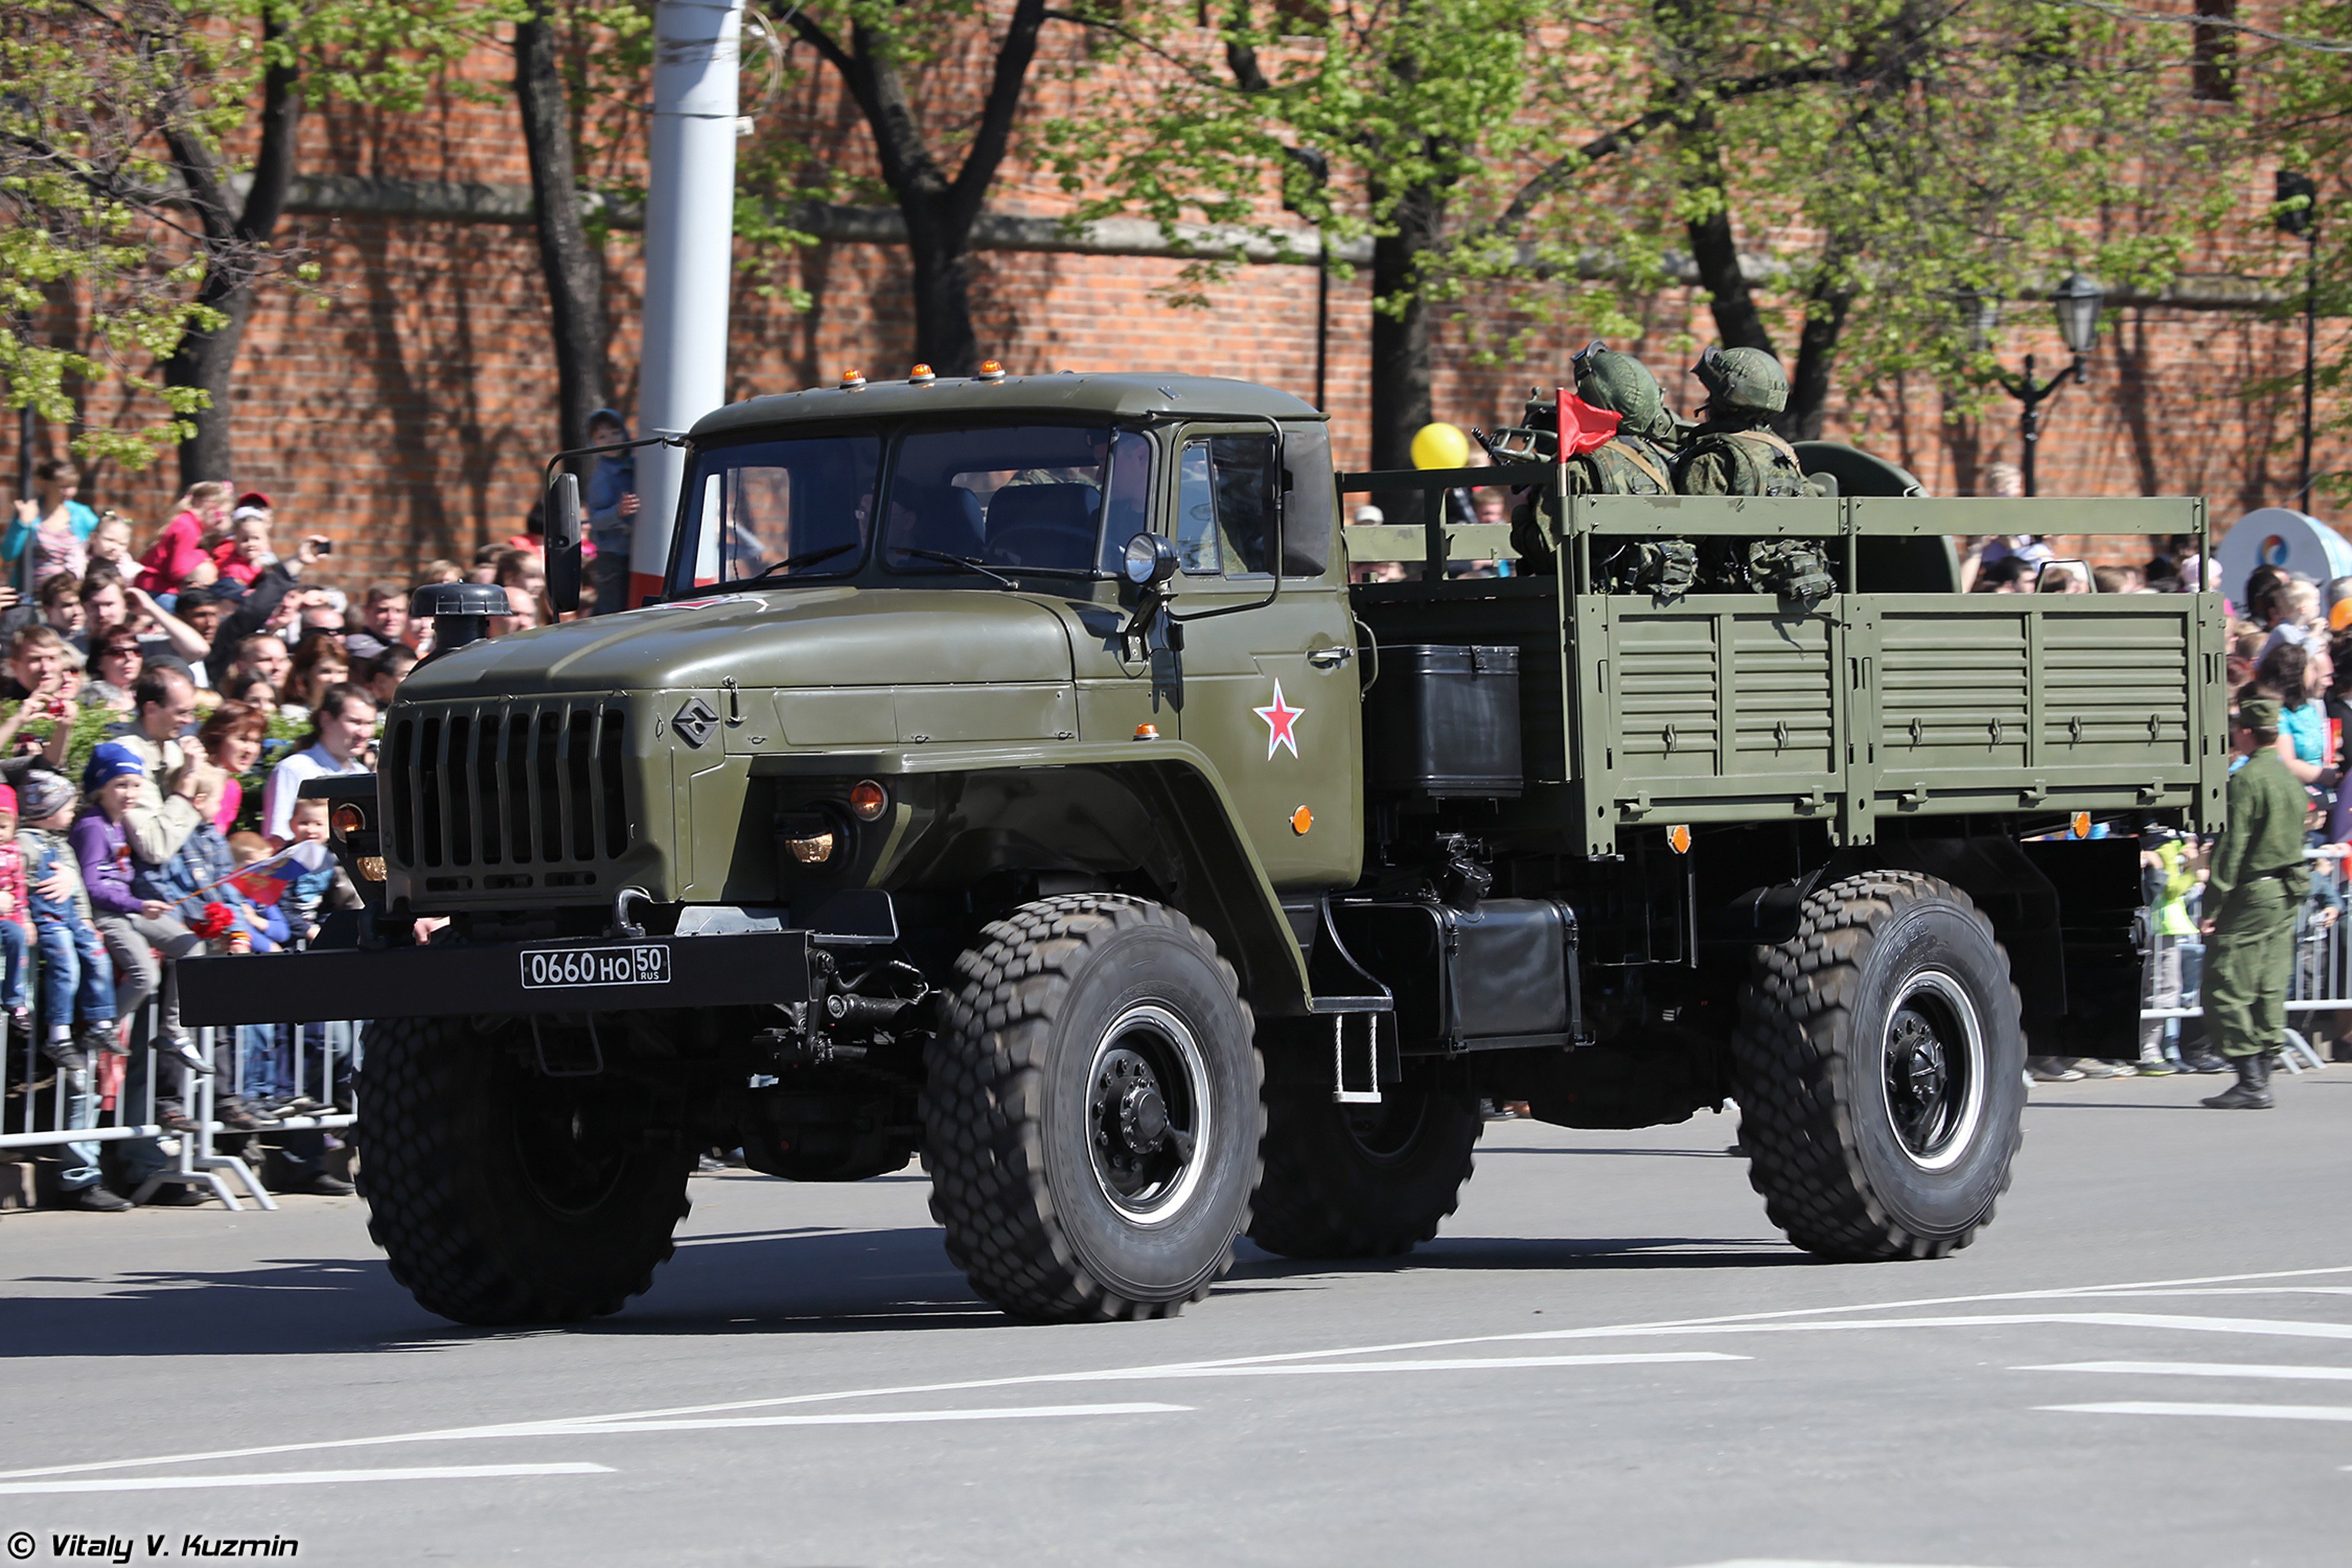 2014, Victory, Day, Parade in nizhny novgorod, Russia, Military, Russian, Army, Red star, Truck, Ural 43206, With, 120mm, 2b11, Mortar, 4000x2667 Wallpaper